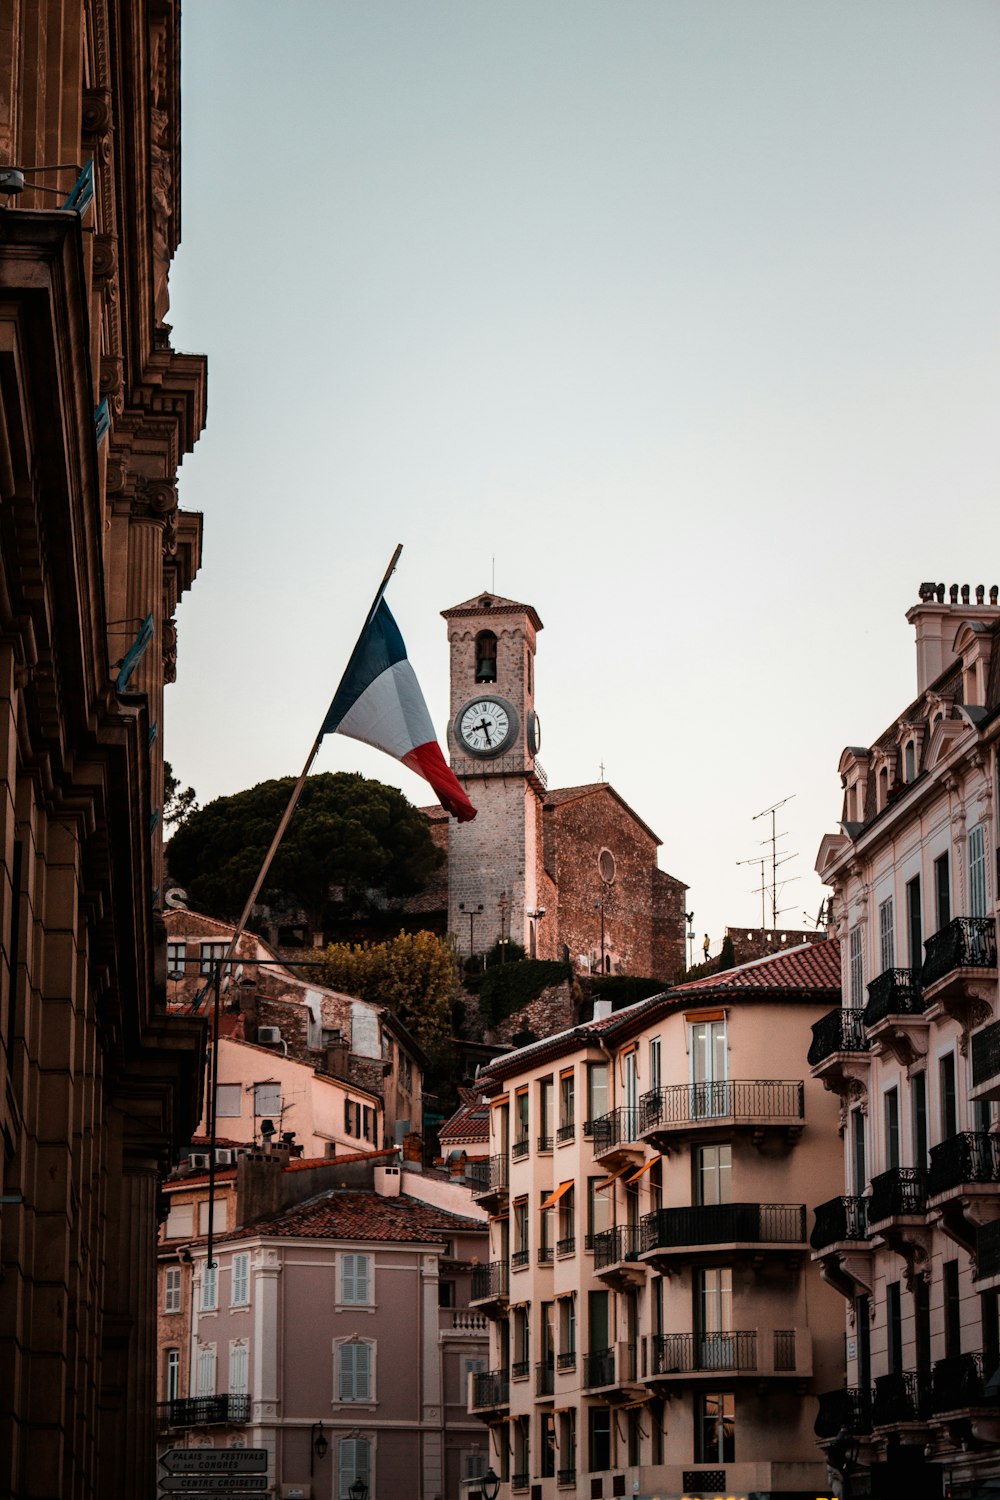 a clock tower in a city